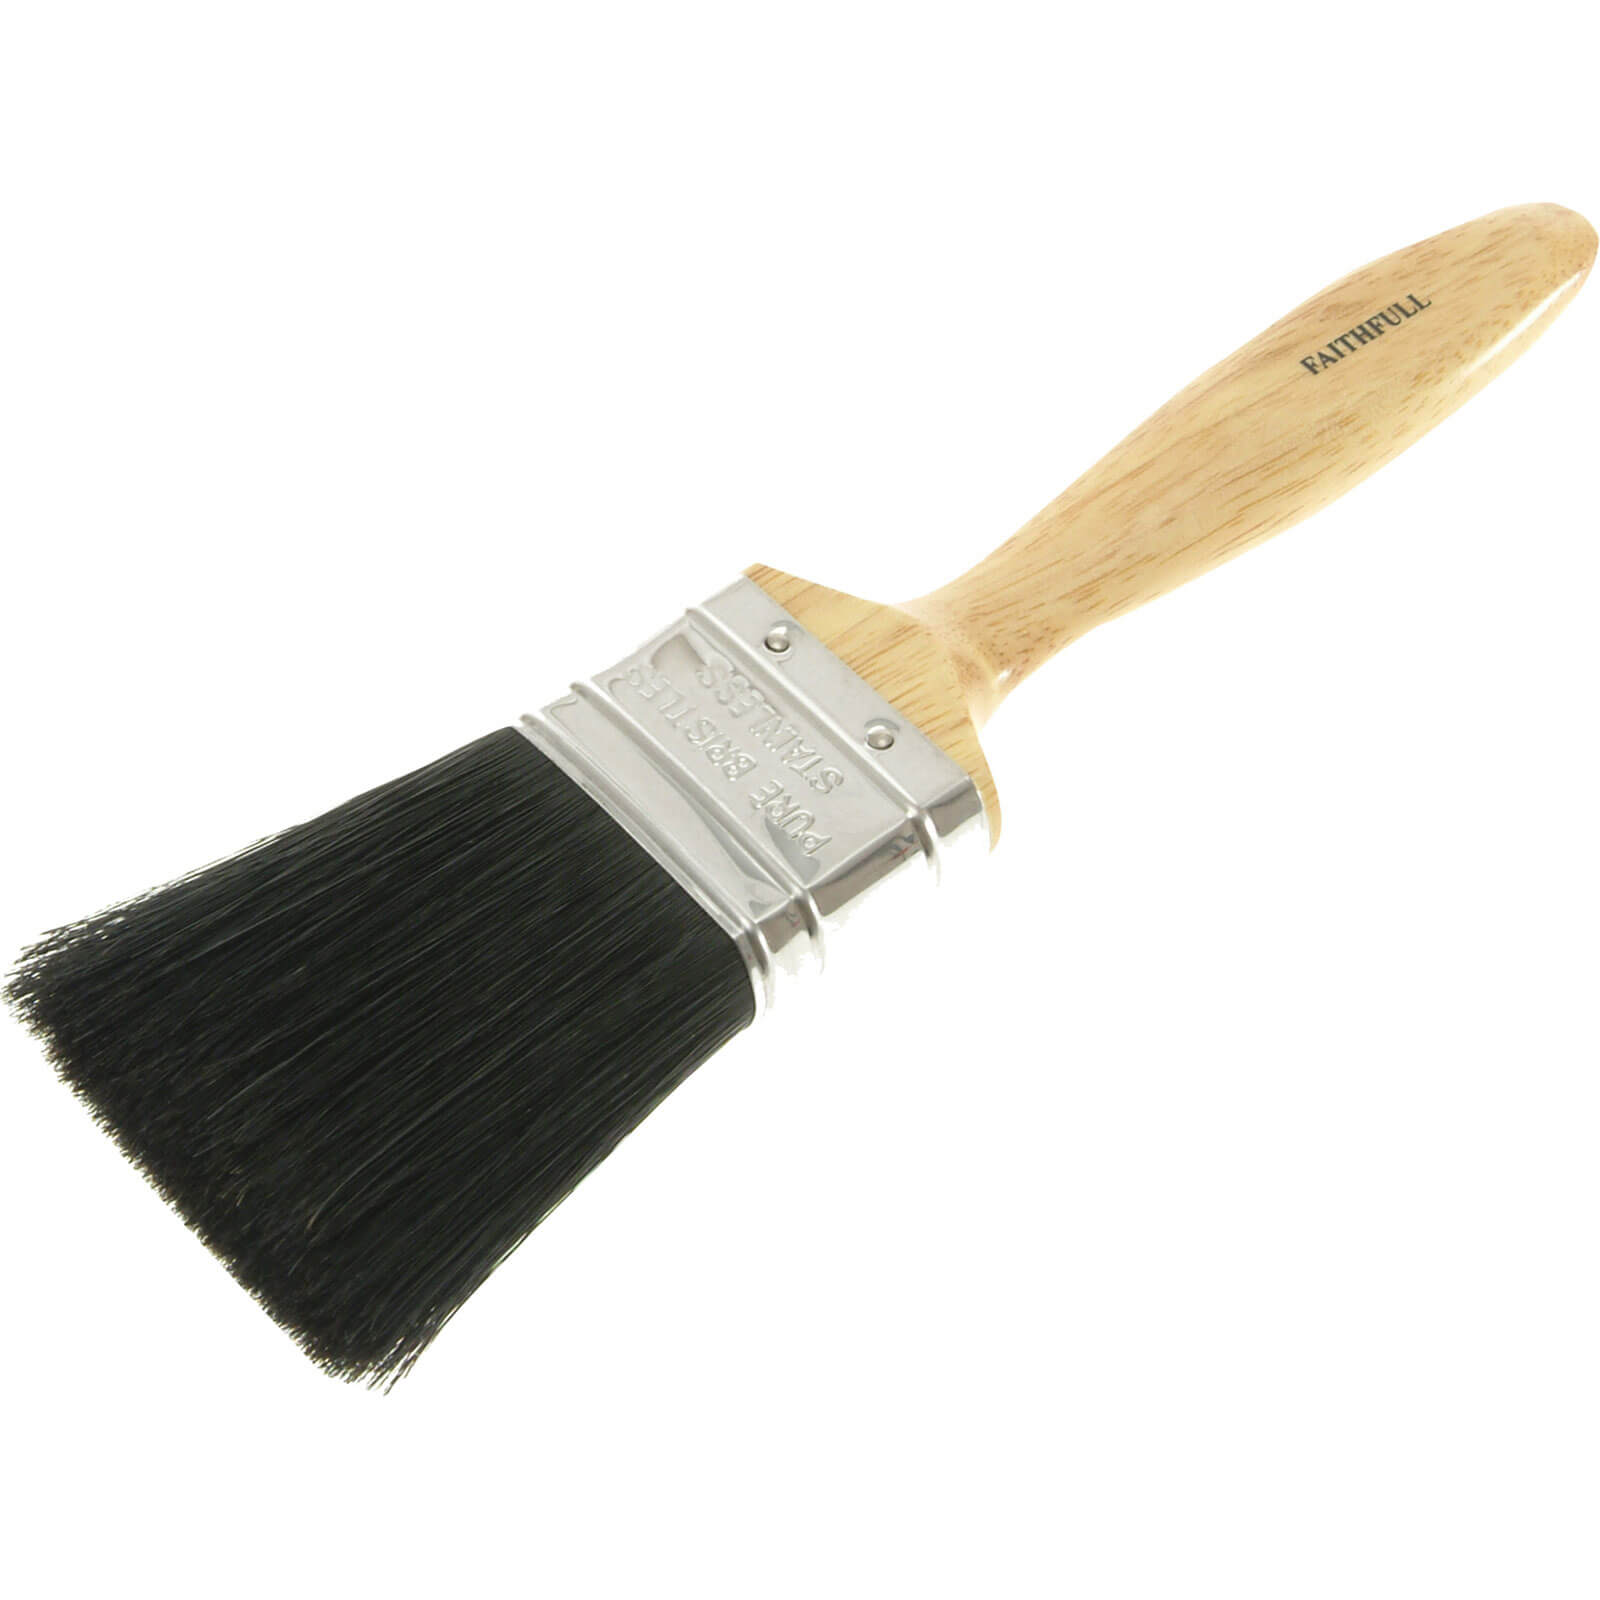 Photos - Putty Knife / Painting Tool Faithfull Contractors Paint Brush 50mm 